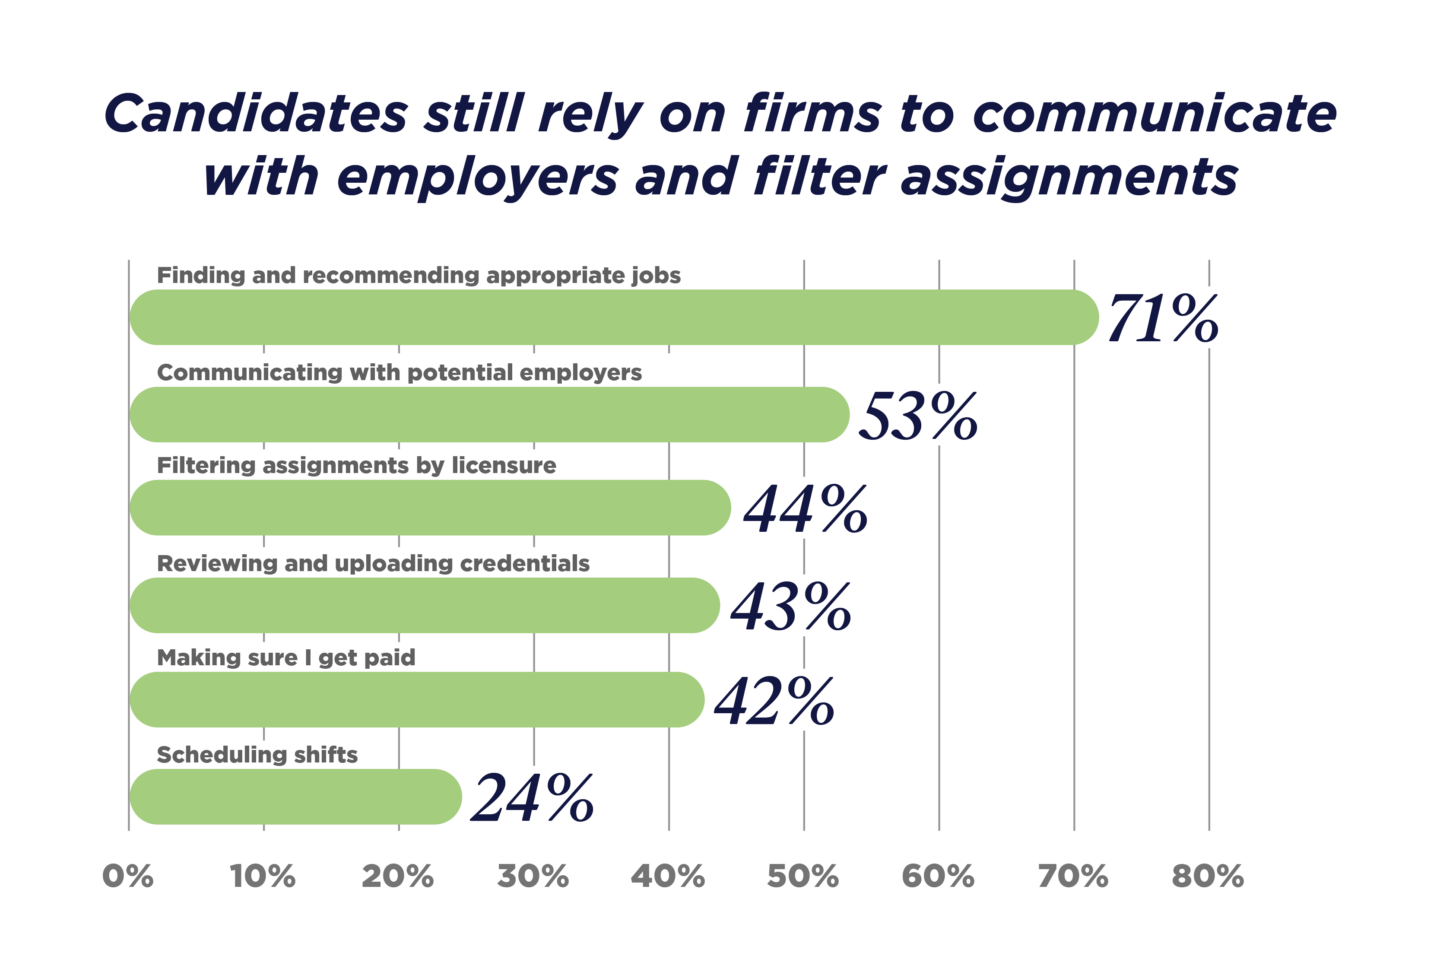 Candidates-still-rely-on-firms-to-communicate-with-employers-and-filter-assignments